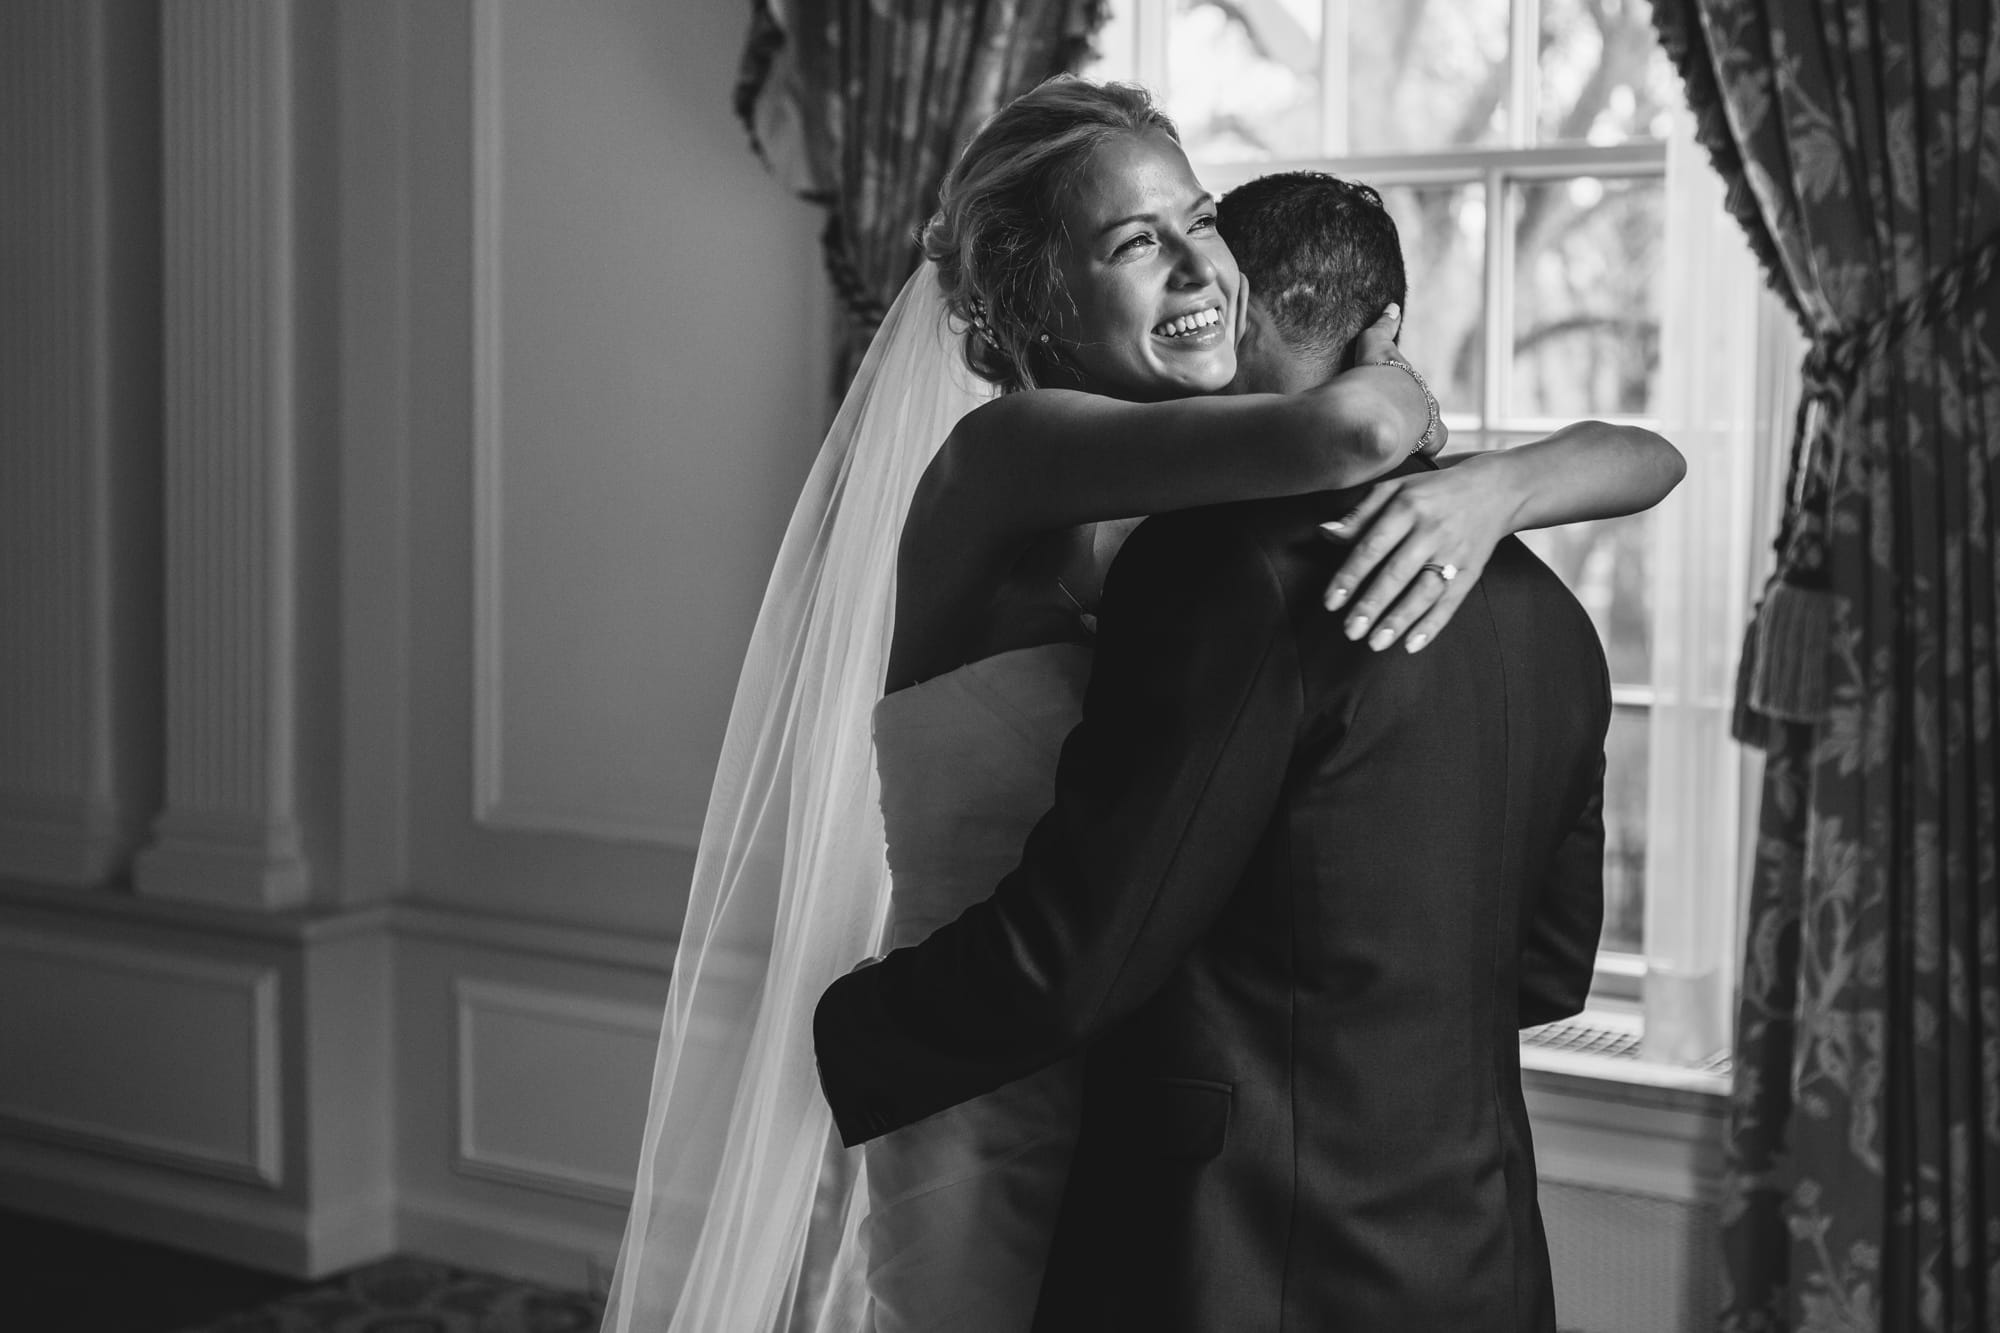 This documentary photograph of a bride and groom seeing each other is one of the best wedding photographs of 2016